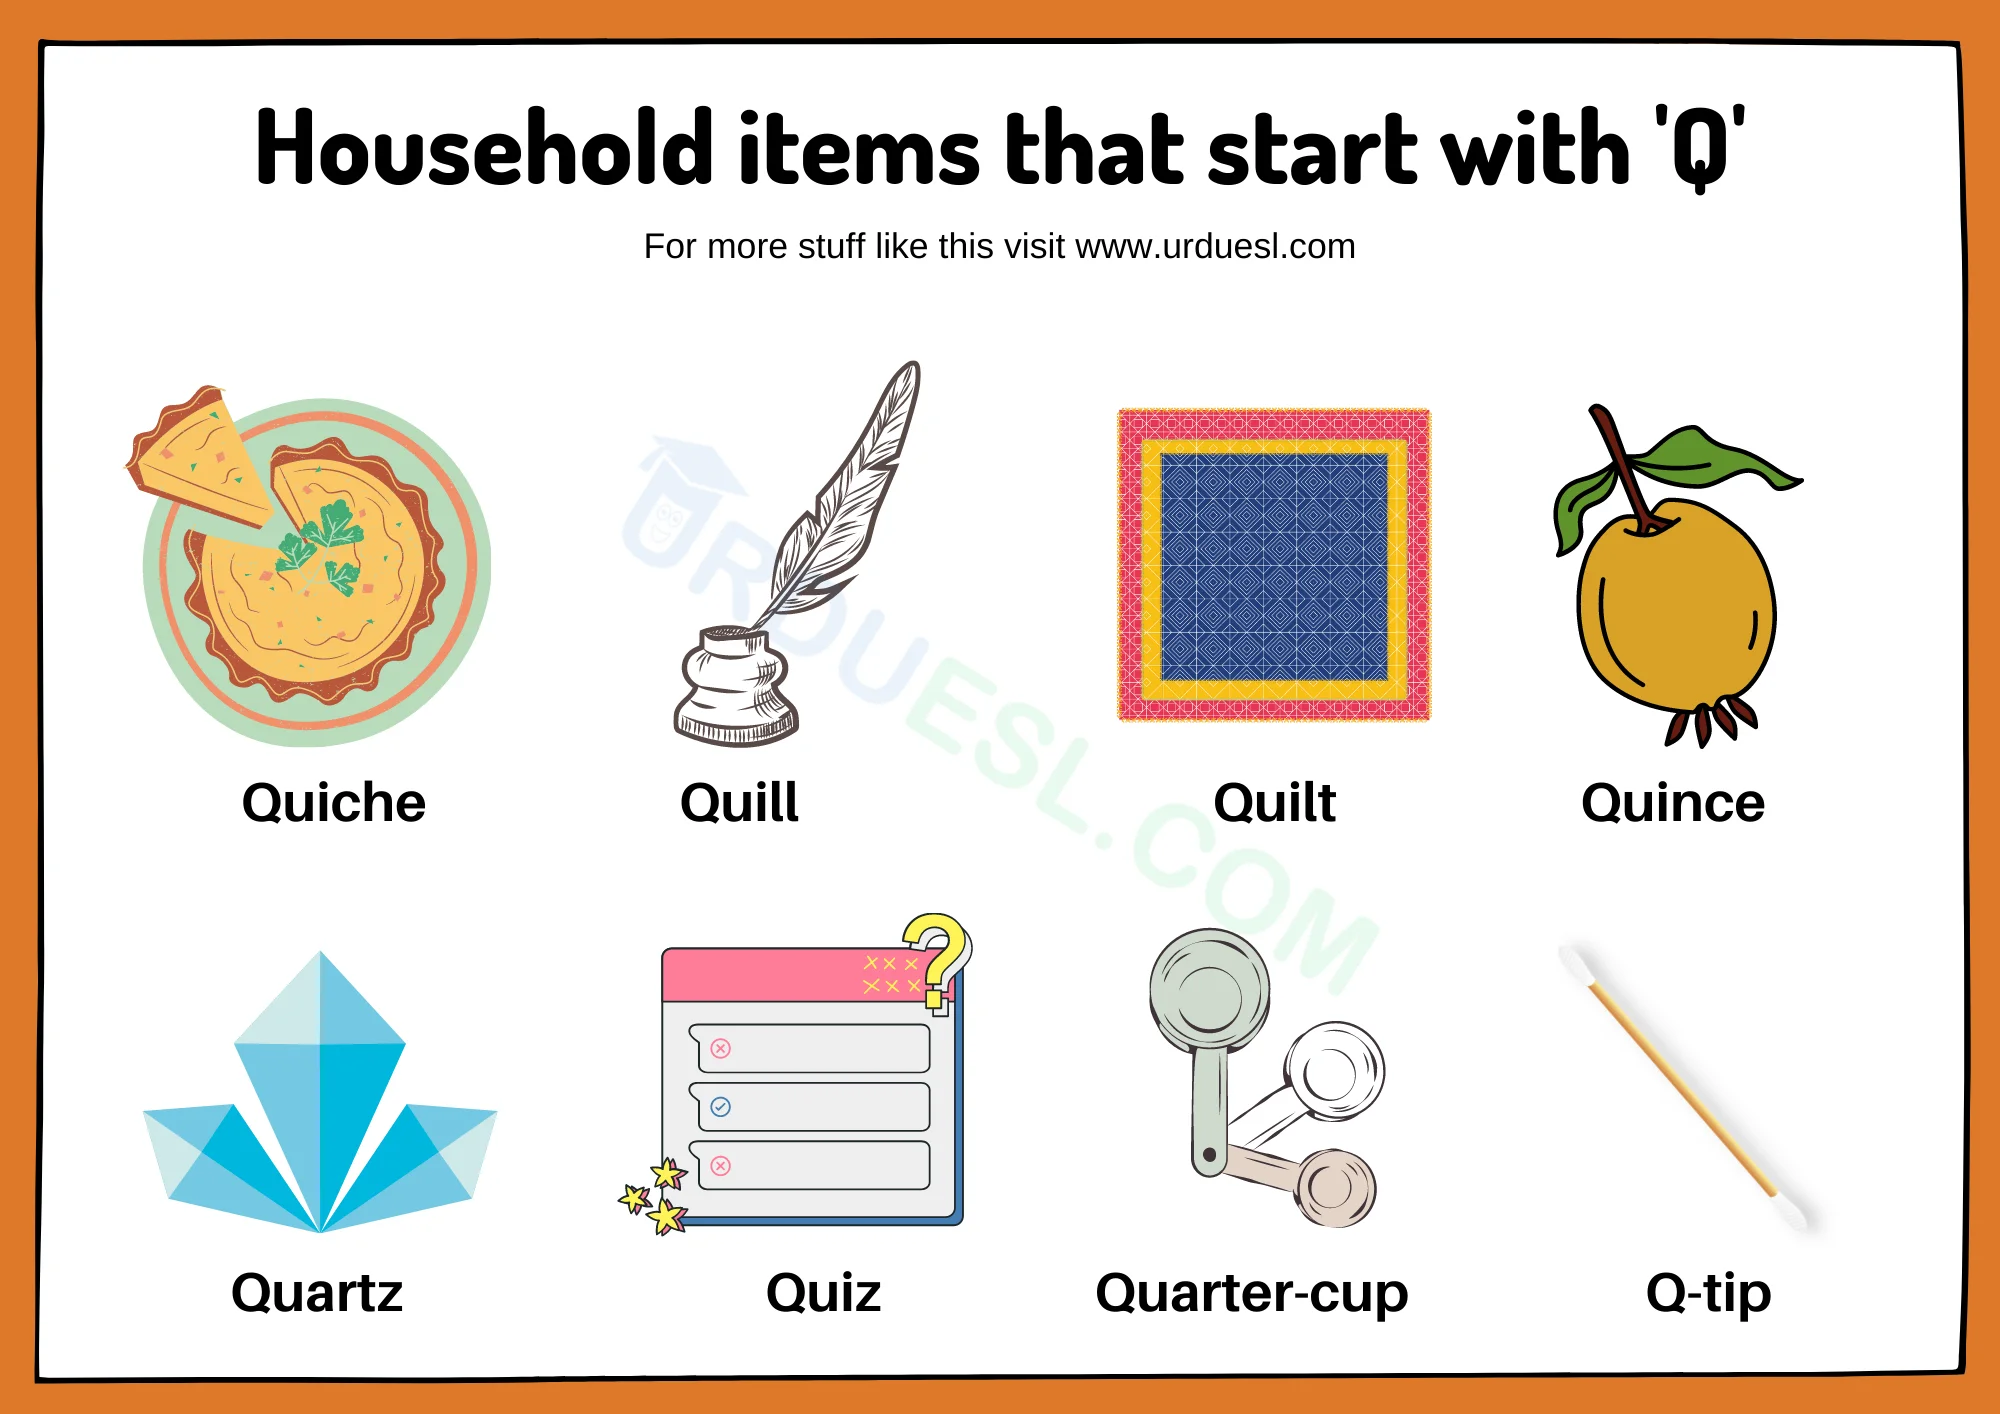 Household Items That Start With Q - Things that Start with Q